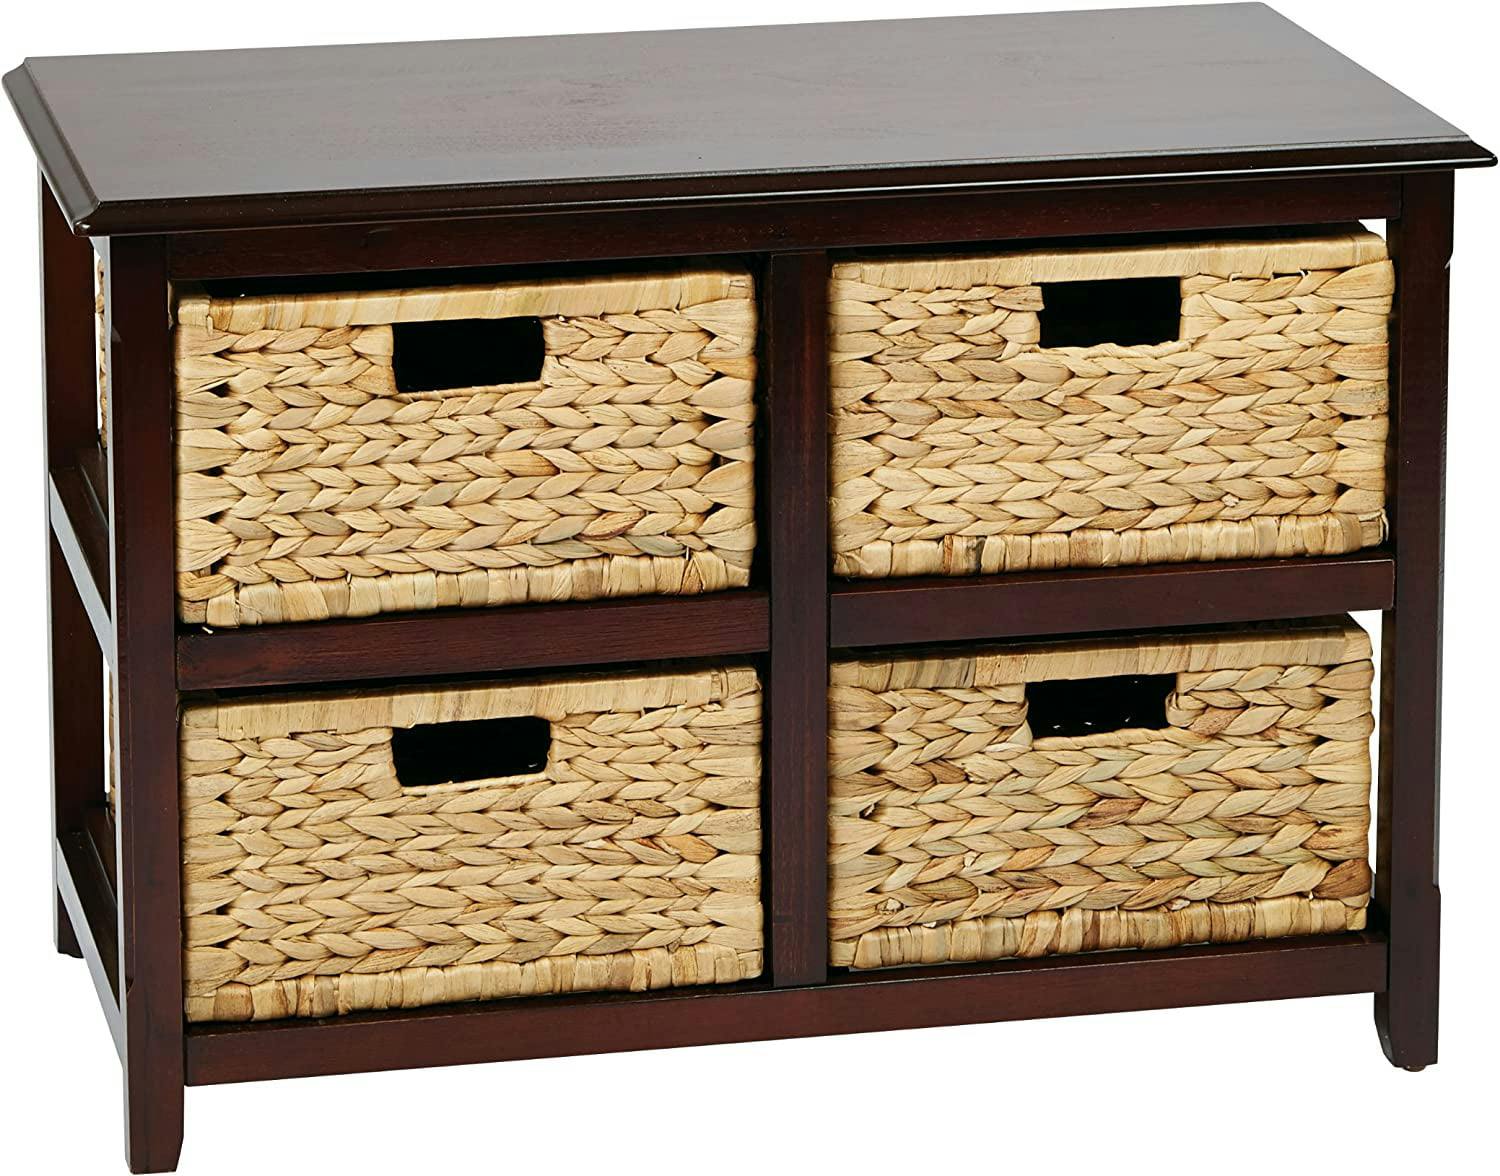 Espresso Finish 2-Tier Storage Tower with Natural Sea Grass Baskets